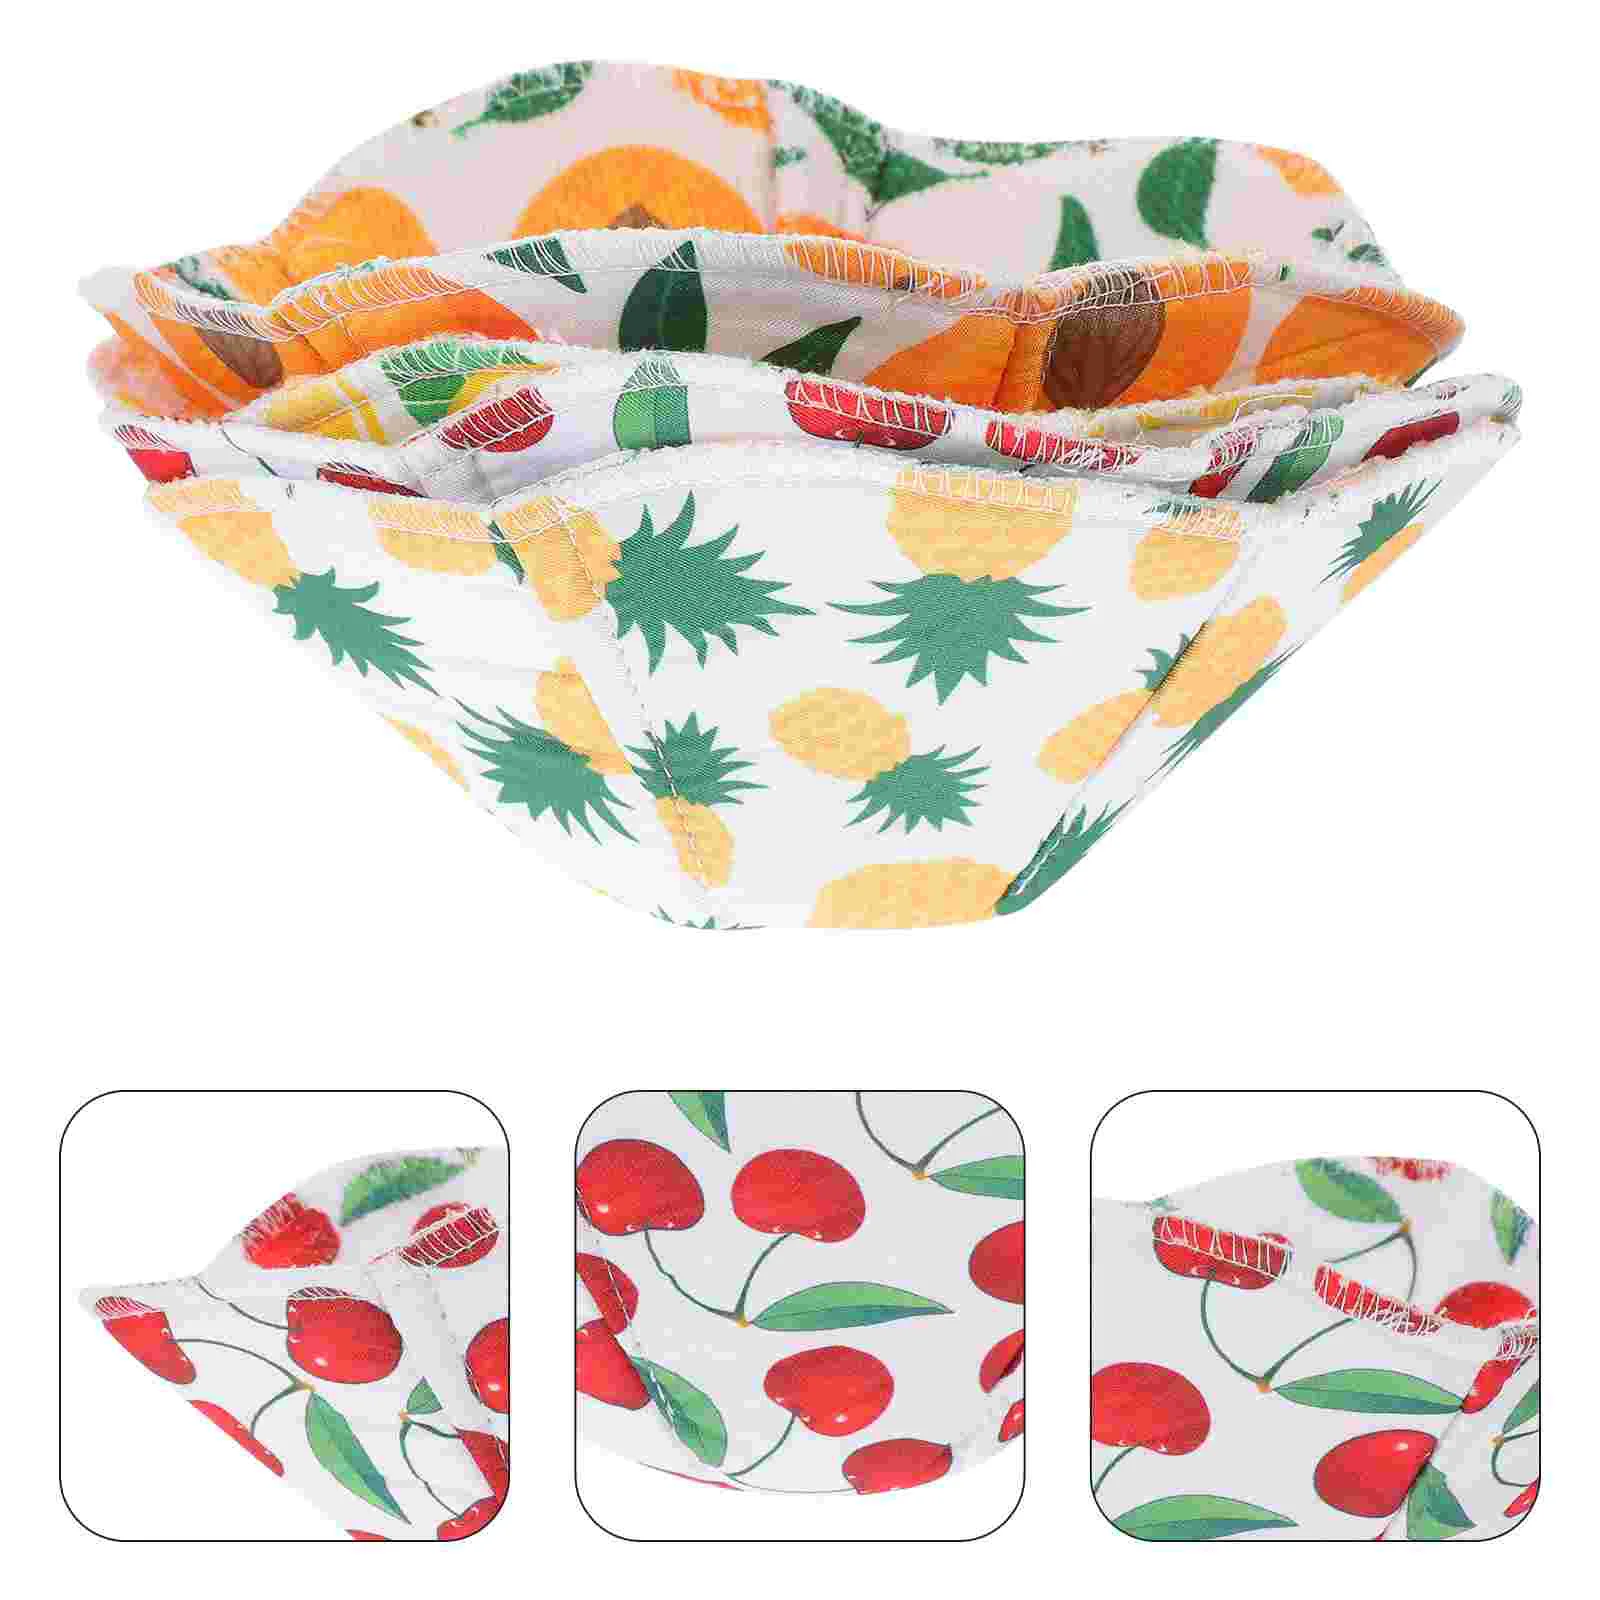 

4 Pcs Soup Bowls Microwave Holder Insulation Covers Heat Resistant Anti-scald Holders For Kitchen